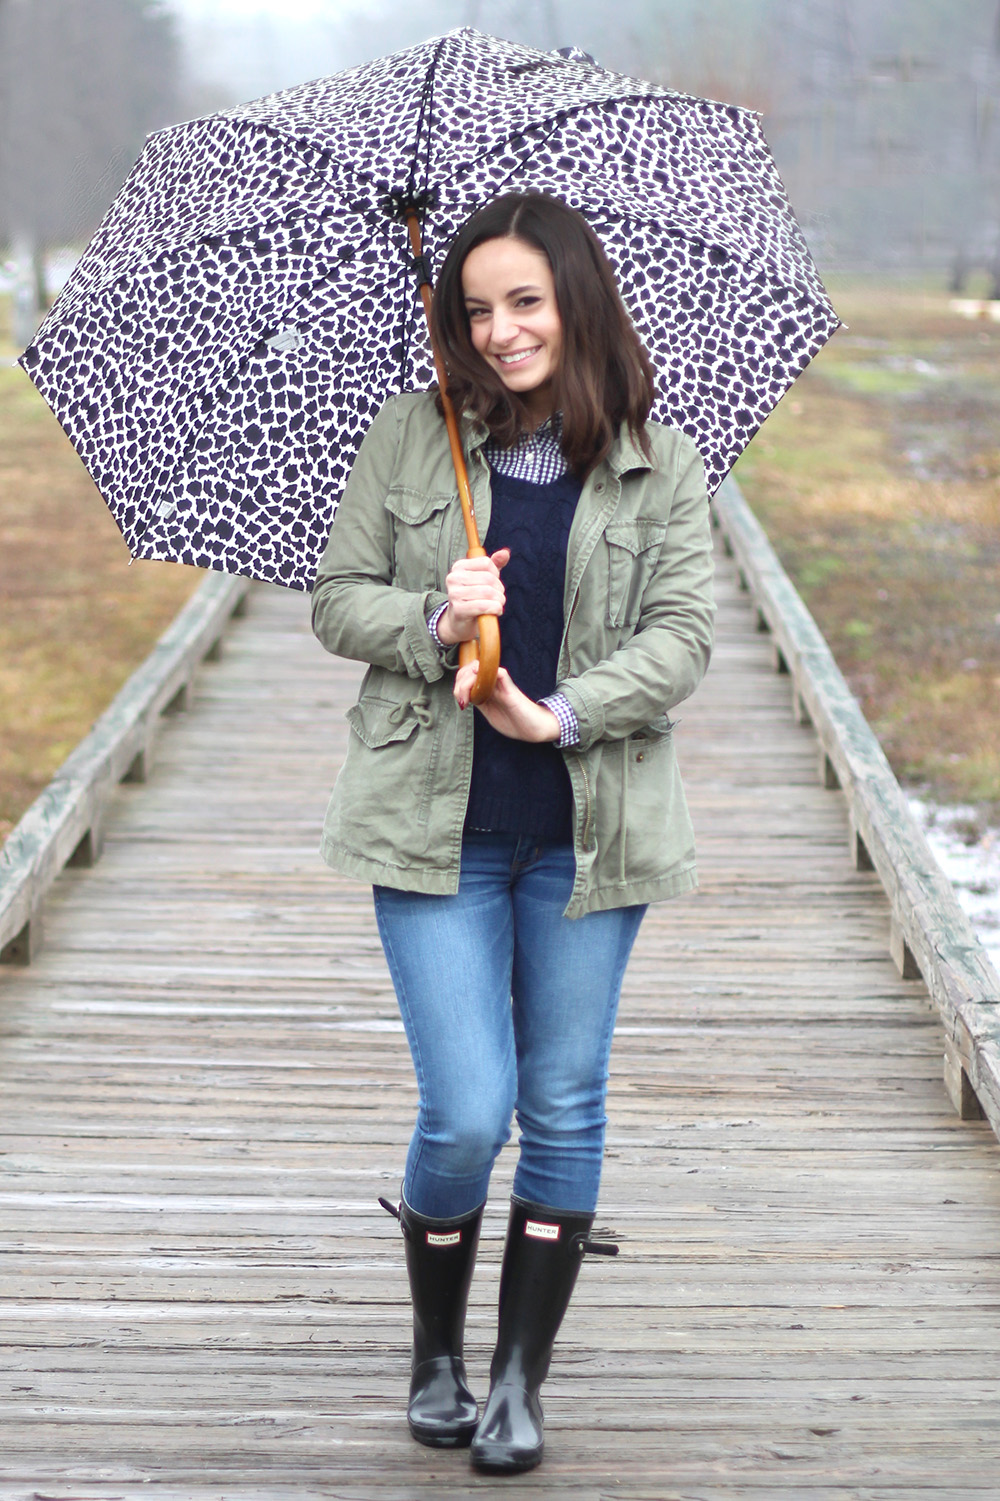 How to wear rain boots | rainy day outfit | pumps and push-ups